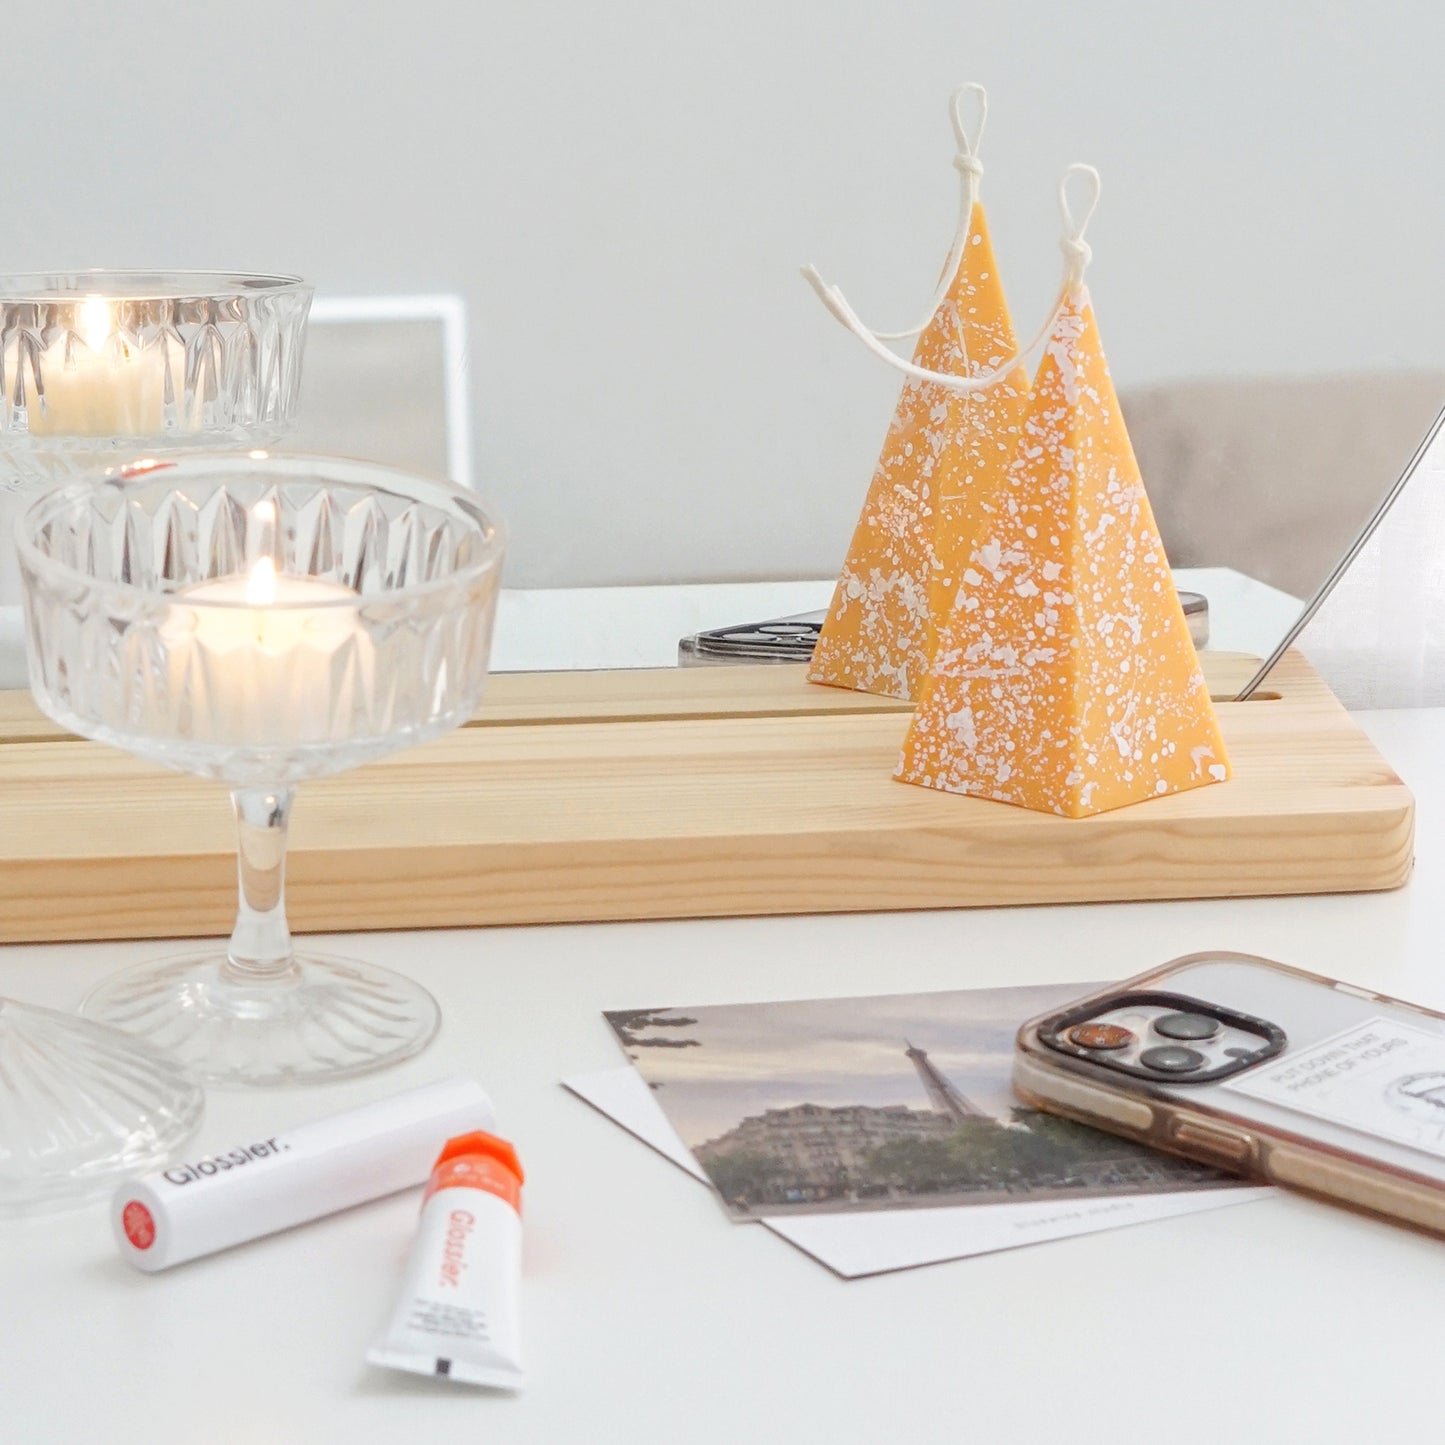 a lit pentagonal pyramid shape soy pillar candle with white splatter pattern on wavy mirror, a lit tealight candle in a coupe glass, glossier lip gloss, eiffel tower postard, and iphone 13 pro